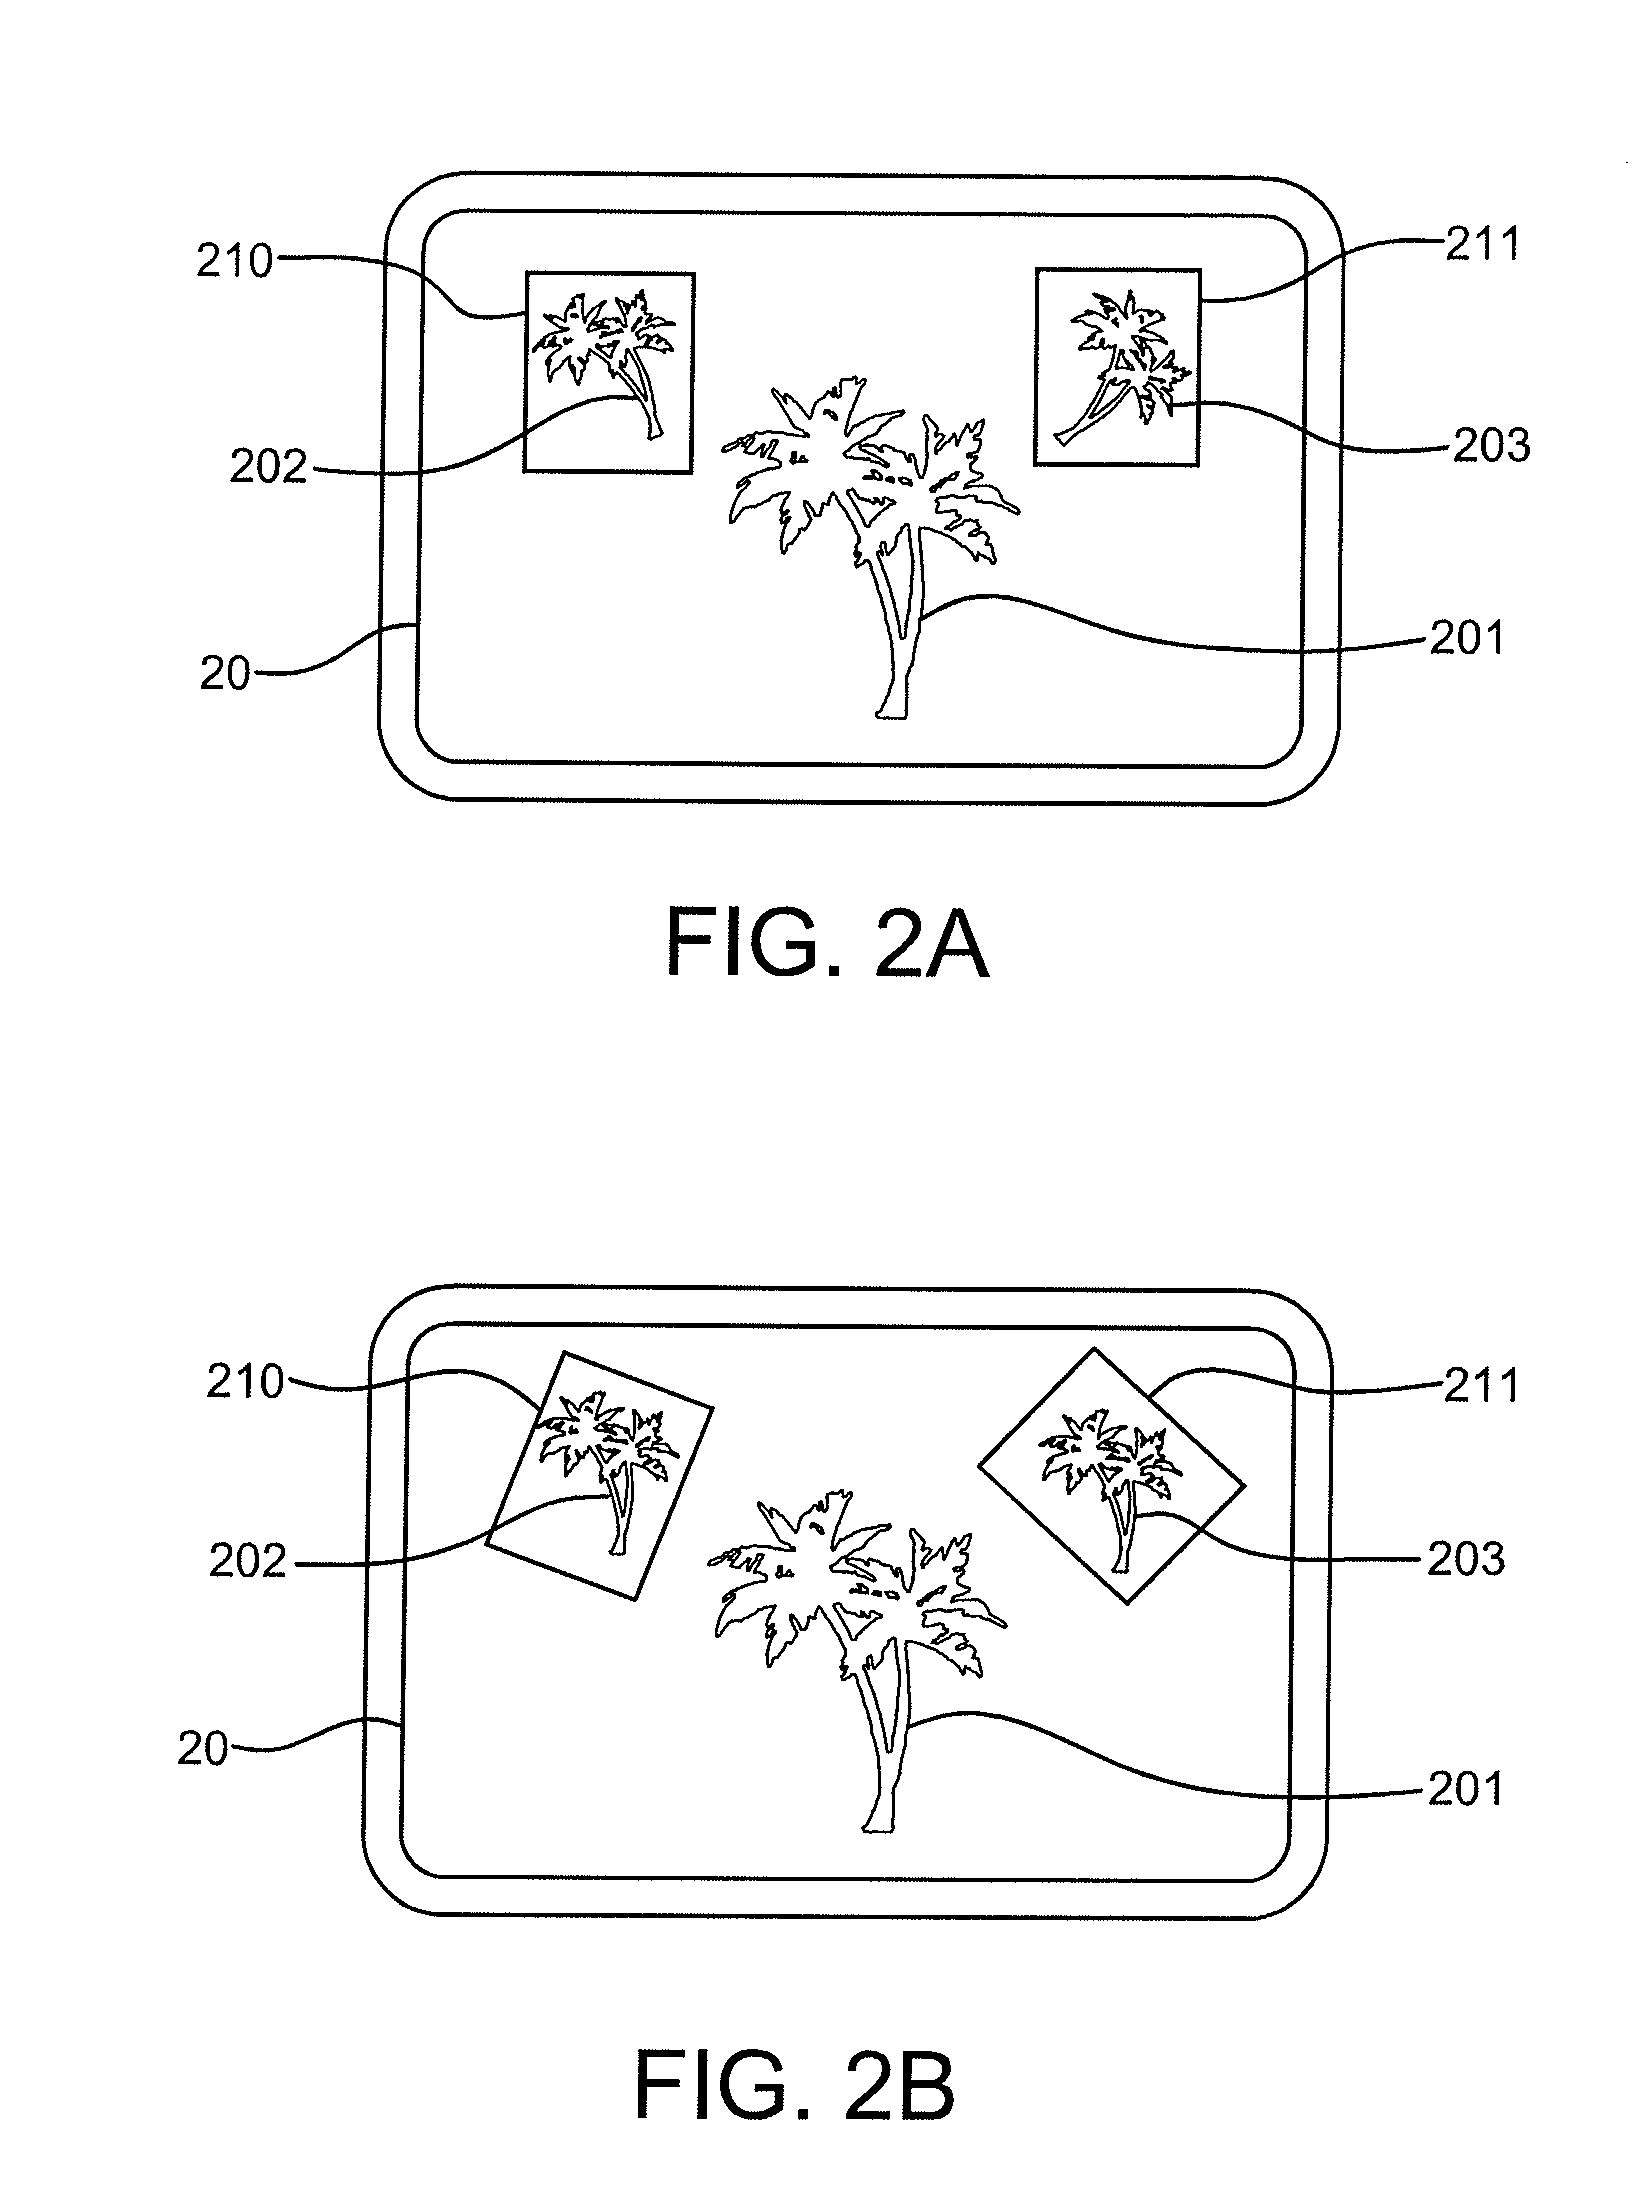 Methods and processes to aggregate multiple image feeds and dynamically select command reference frames